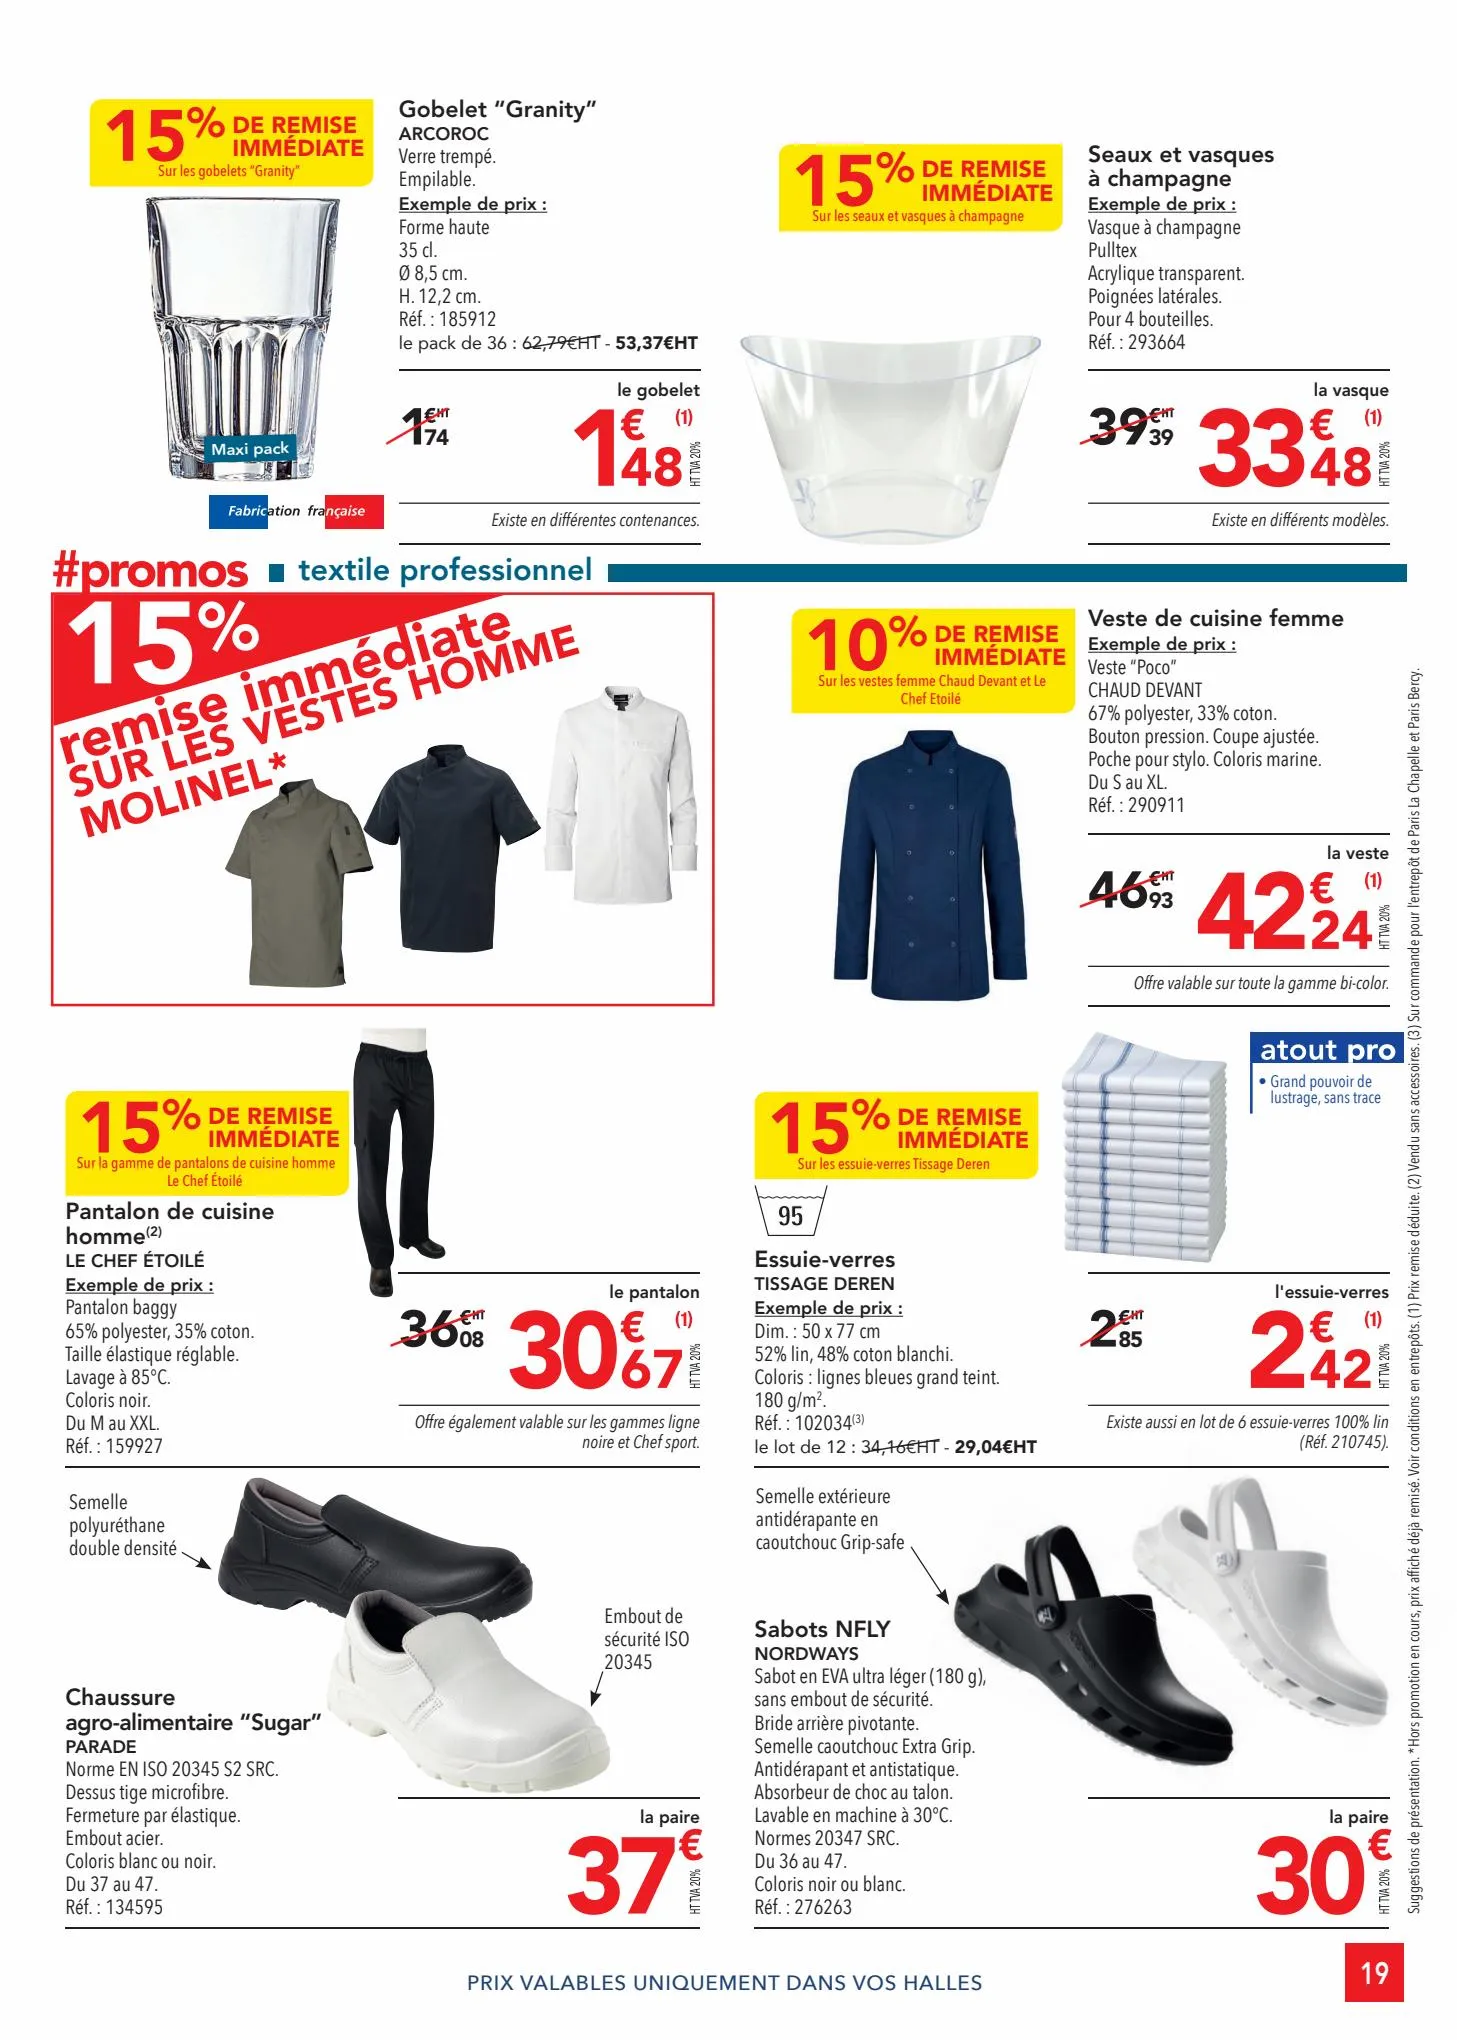 Catalogue Selection Promos Equipement, page 00019